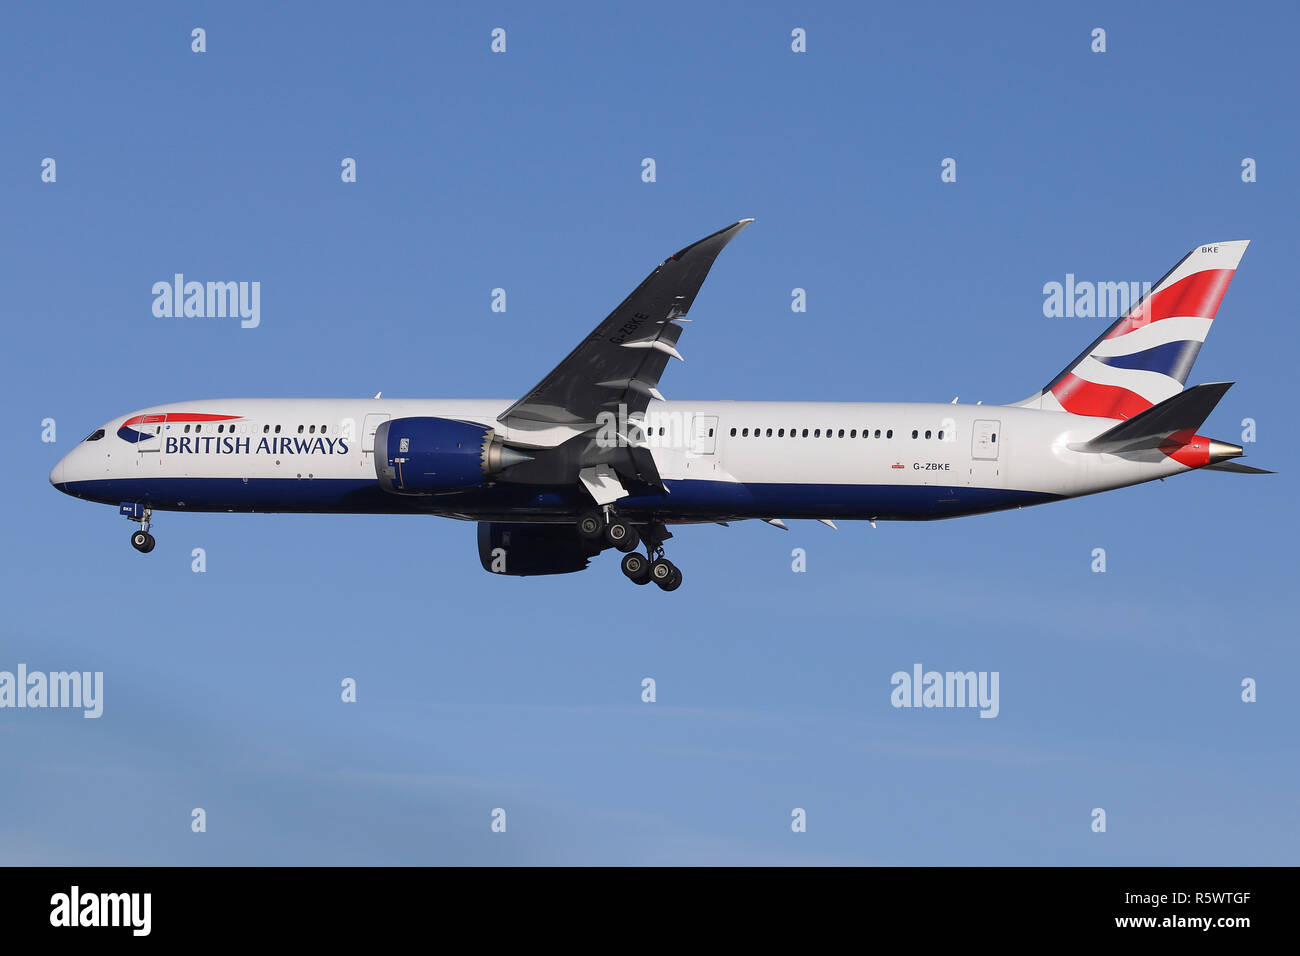 British Airways Boeing 787-9 Dreamliner seen landing at the London Heathrow Airport on a sunny day in December. The aircraft's registration is G-ZBKE and was arriving from Los Angeles, flight BA280. Stock Photo